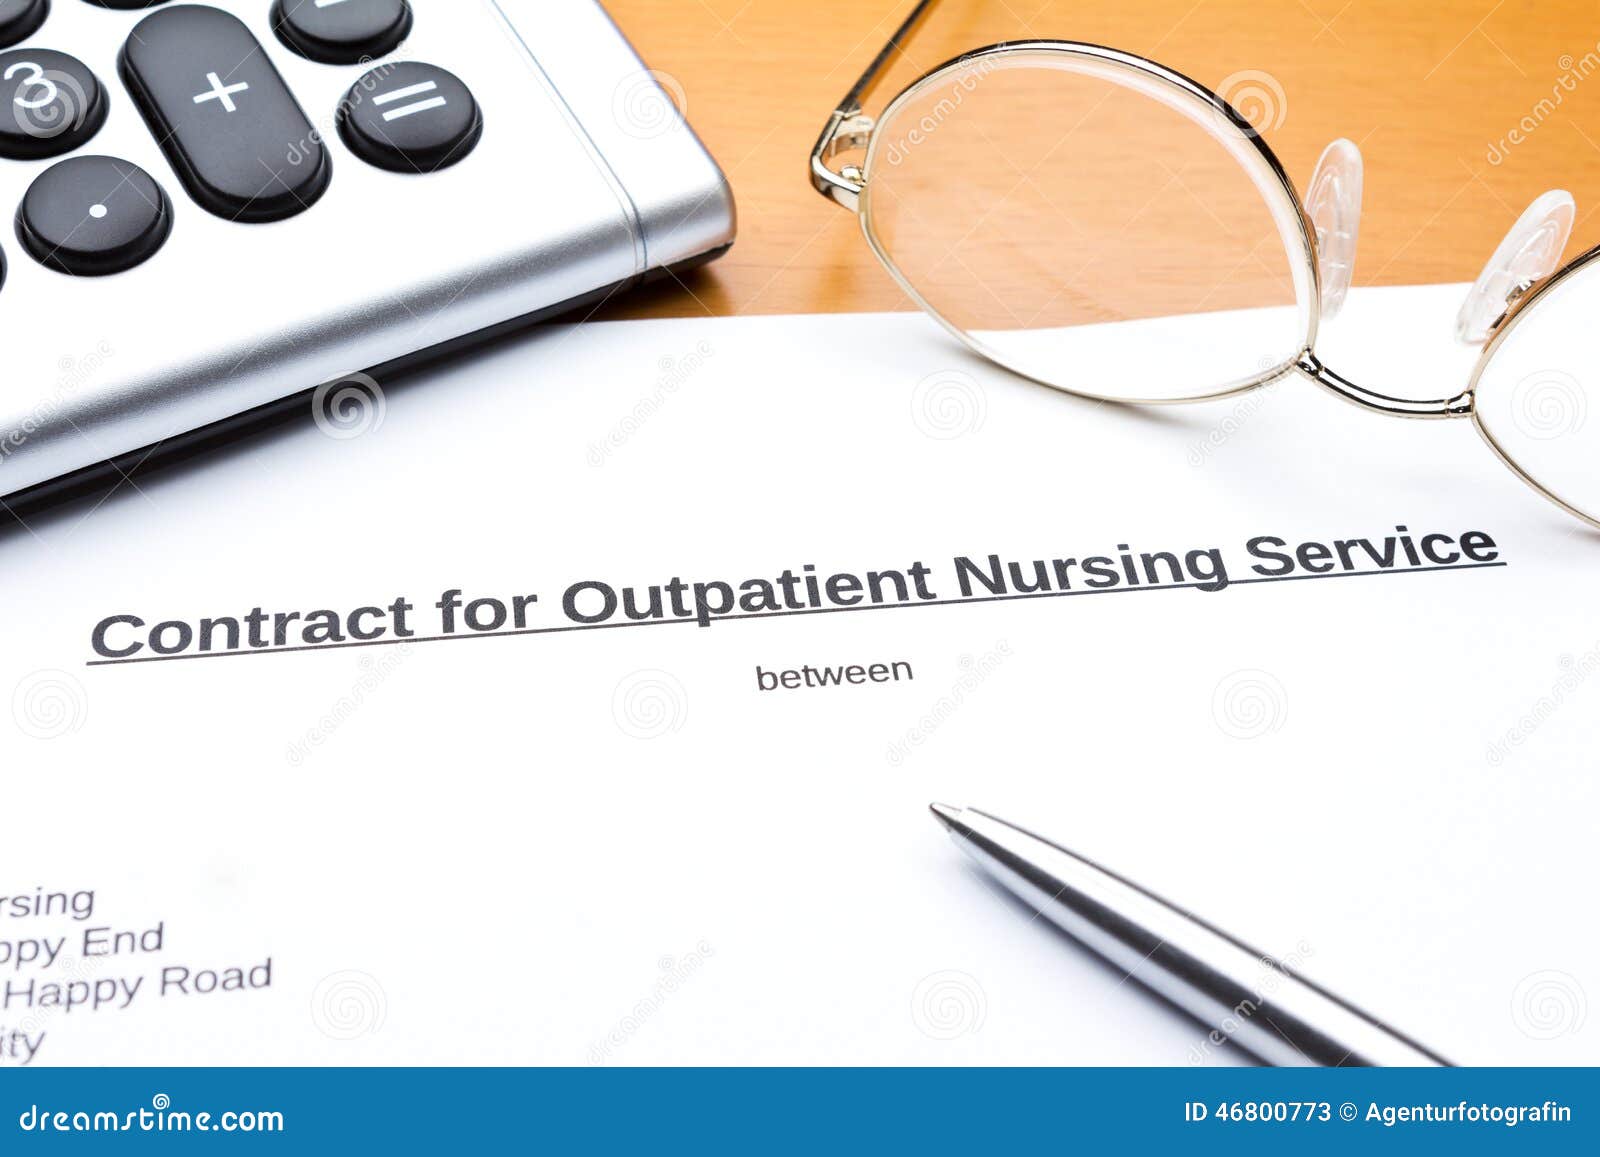 contract outpatient care service calculator